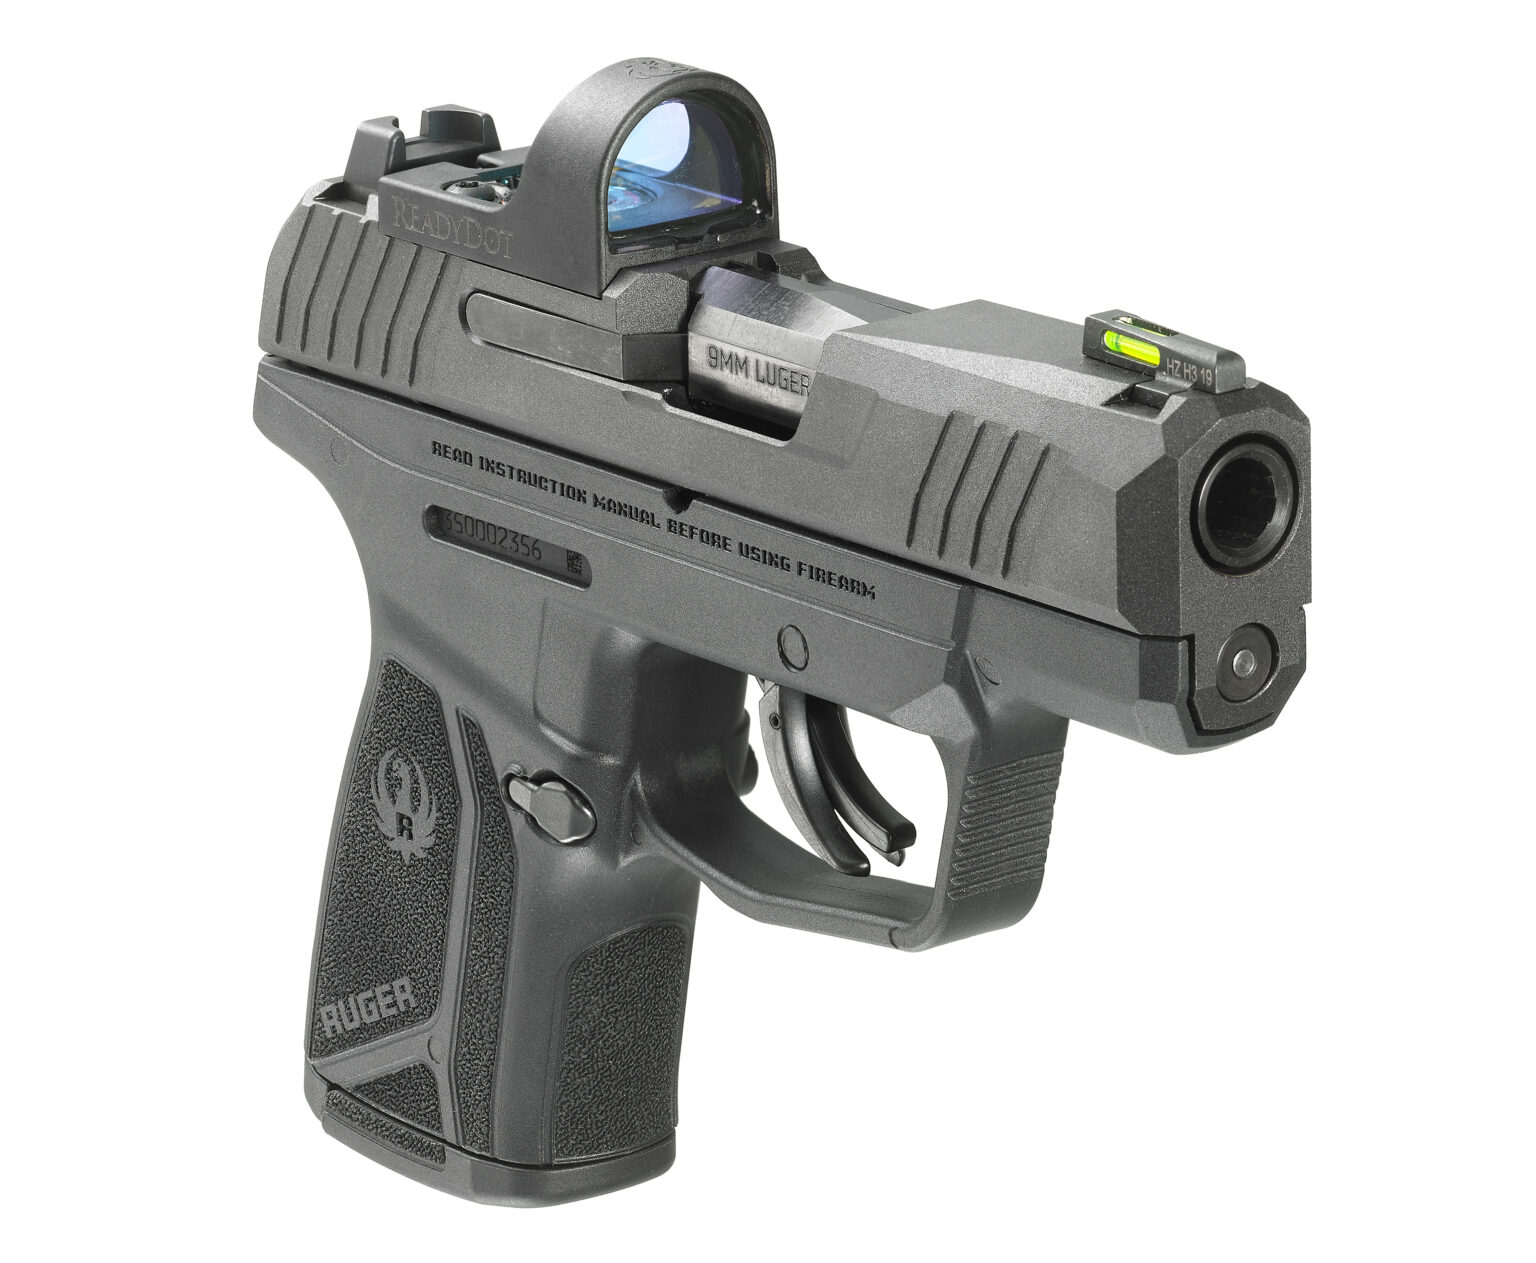 Ruger Unveils Readydot Micro Reflex Optic Max 9 Pistol With Sight Thegunmag The Official 8428